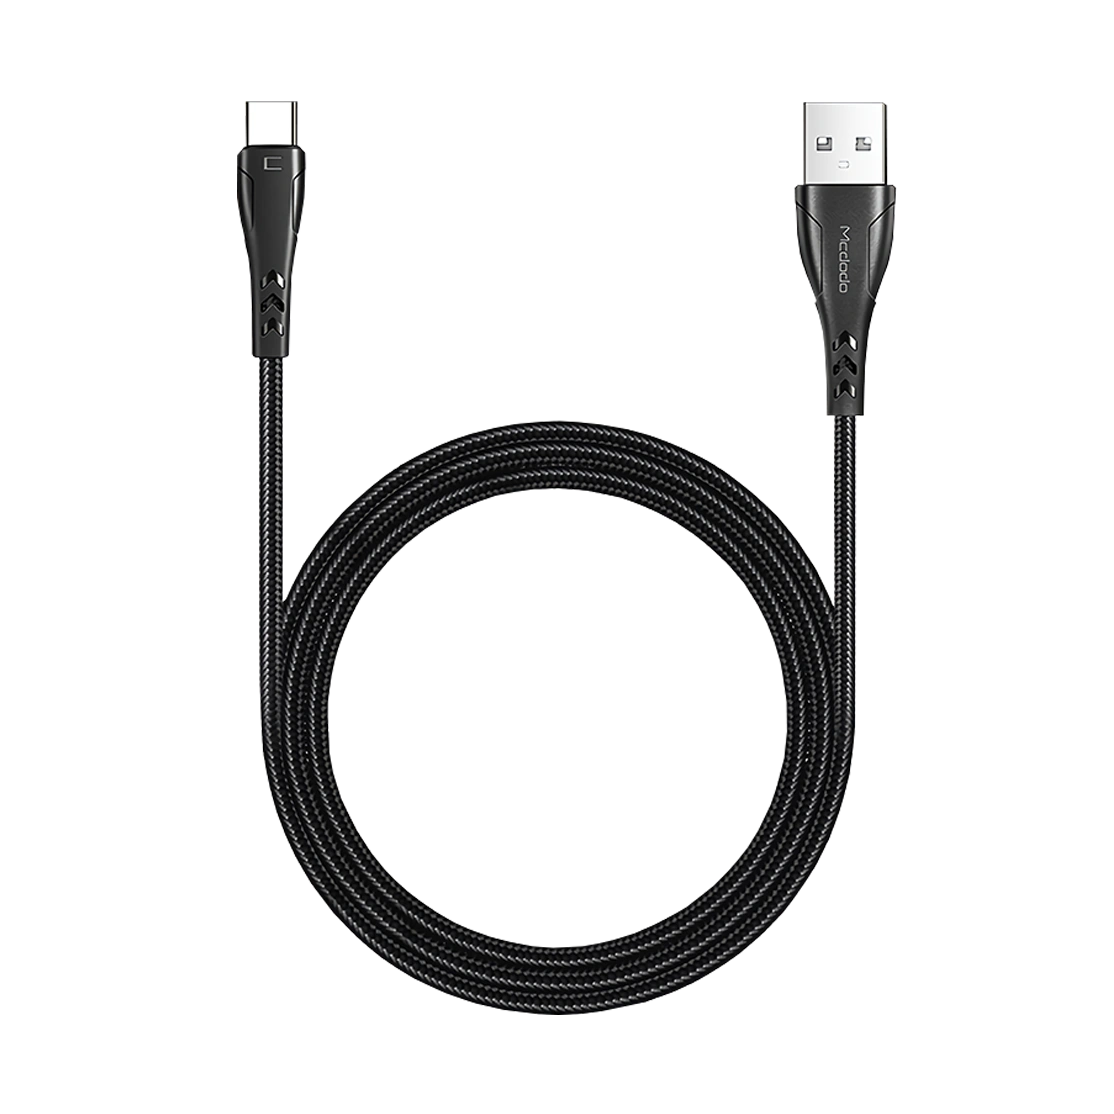 Mcdodo Fast Charger USB to USB-C Cable 120cm CA-7461